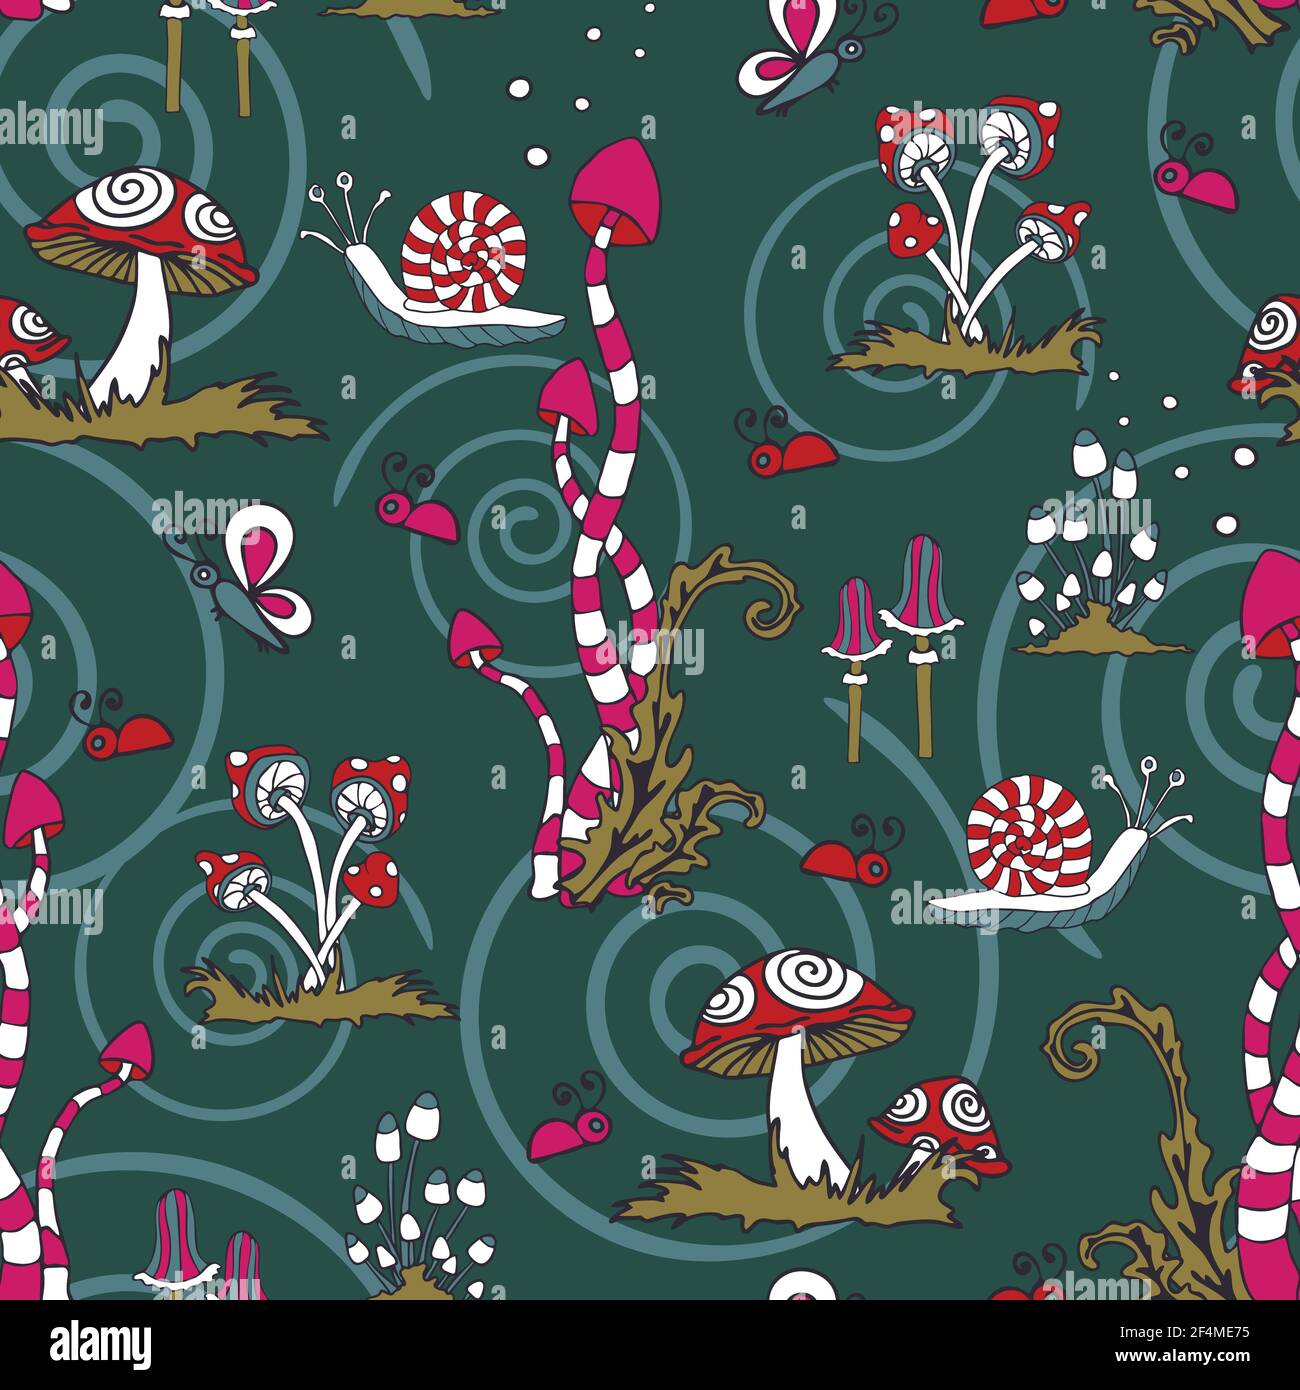 Seamless vector pattern with magic mushrooms on dark green background. Fantasy forest wallpaper design with insects and snails. Crazy fashion textile. Stock Vector